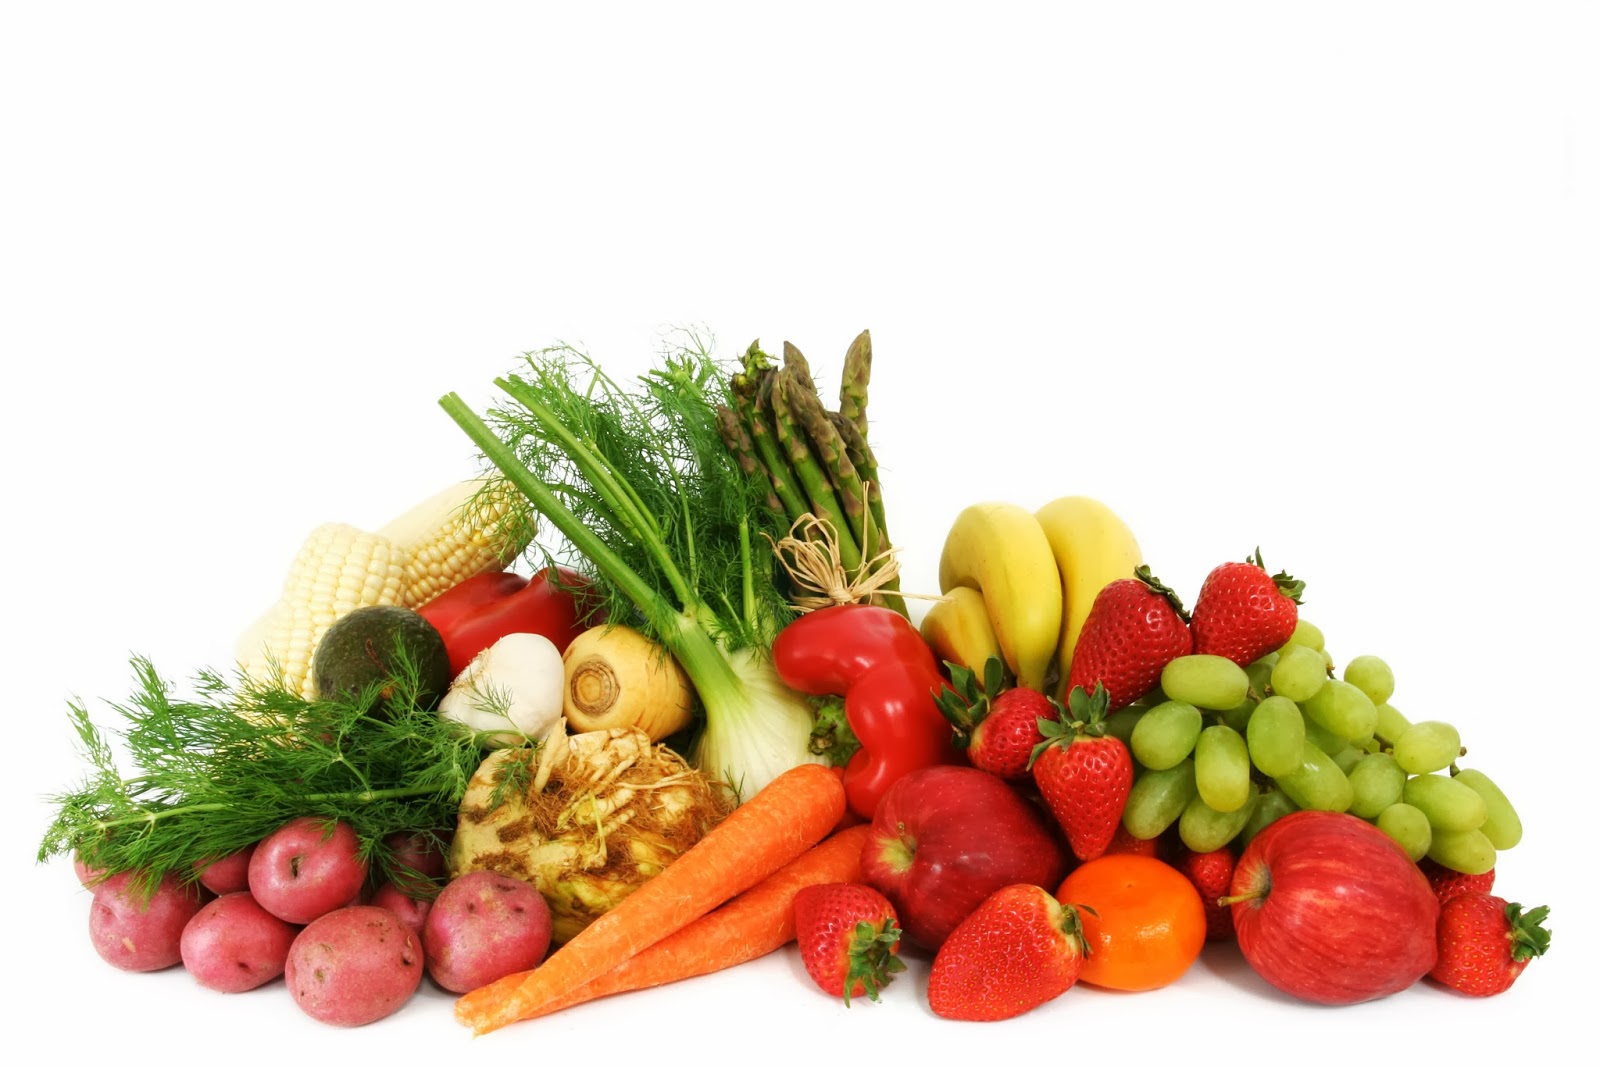 Fruits And Vegetables HD Image Wallpaper